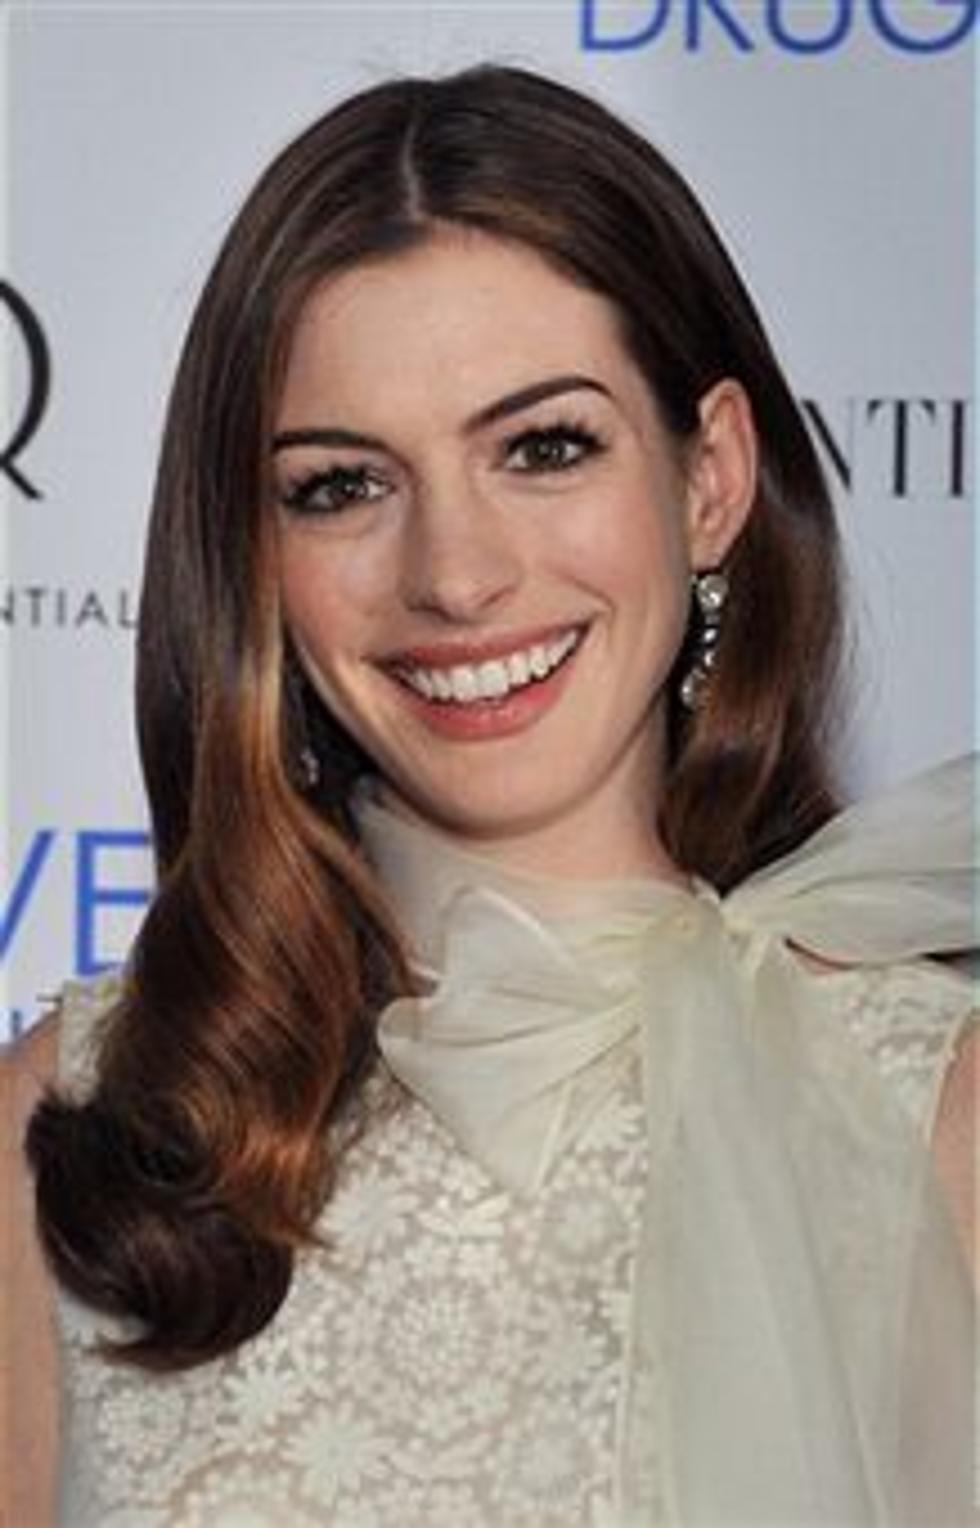 Hathaway To Play “Catwoman”